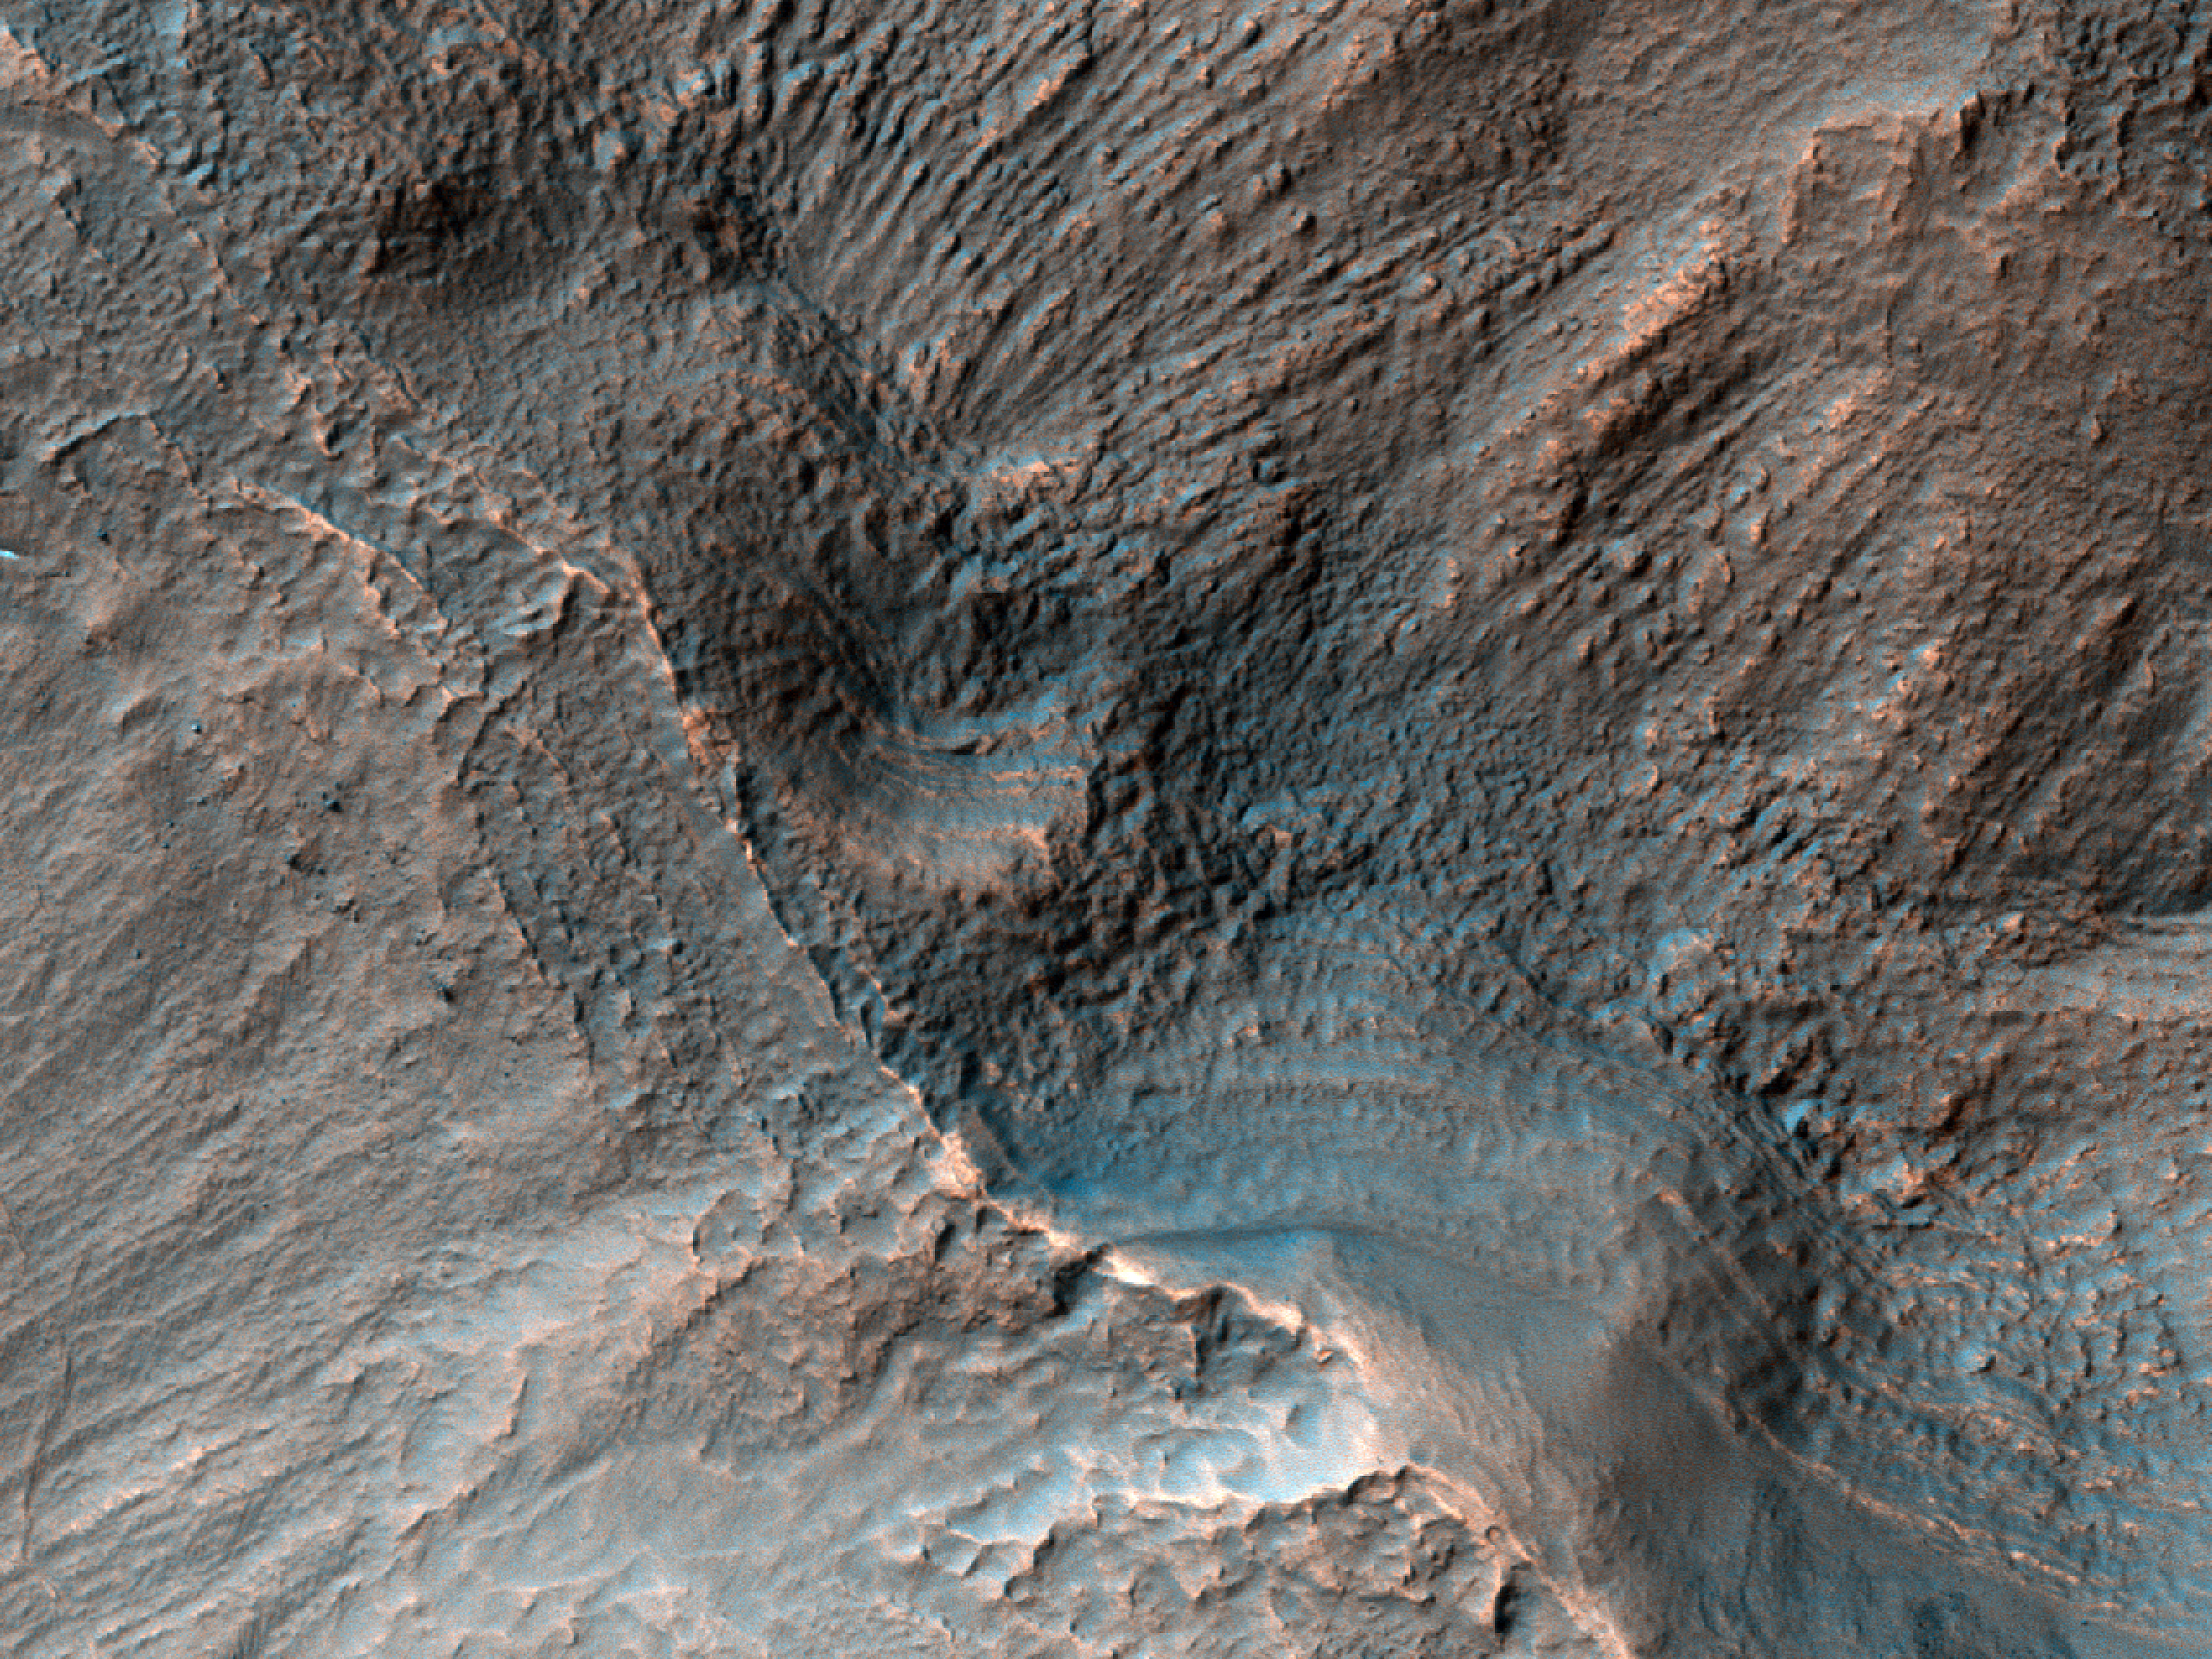 Layers Near the Top of a Crater